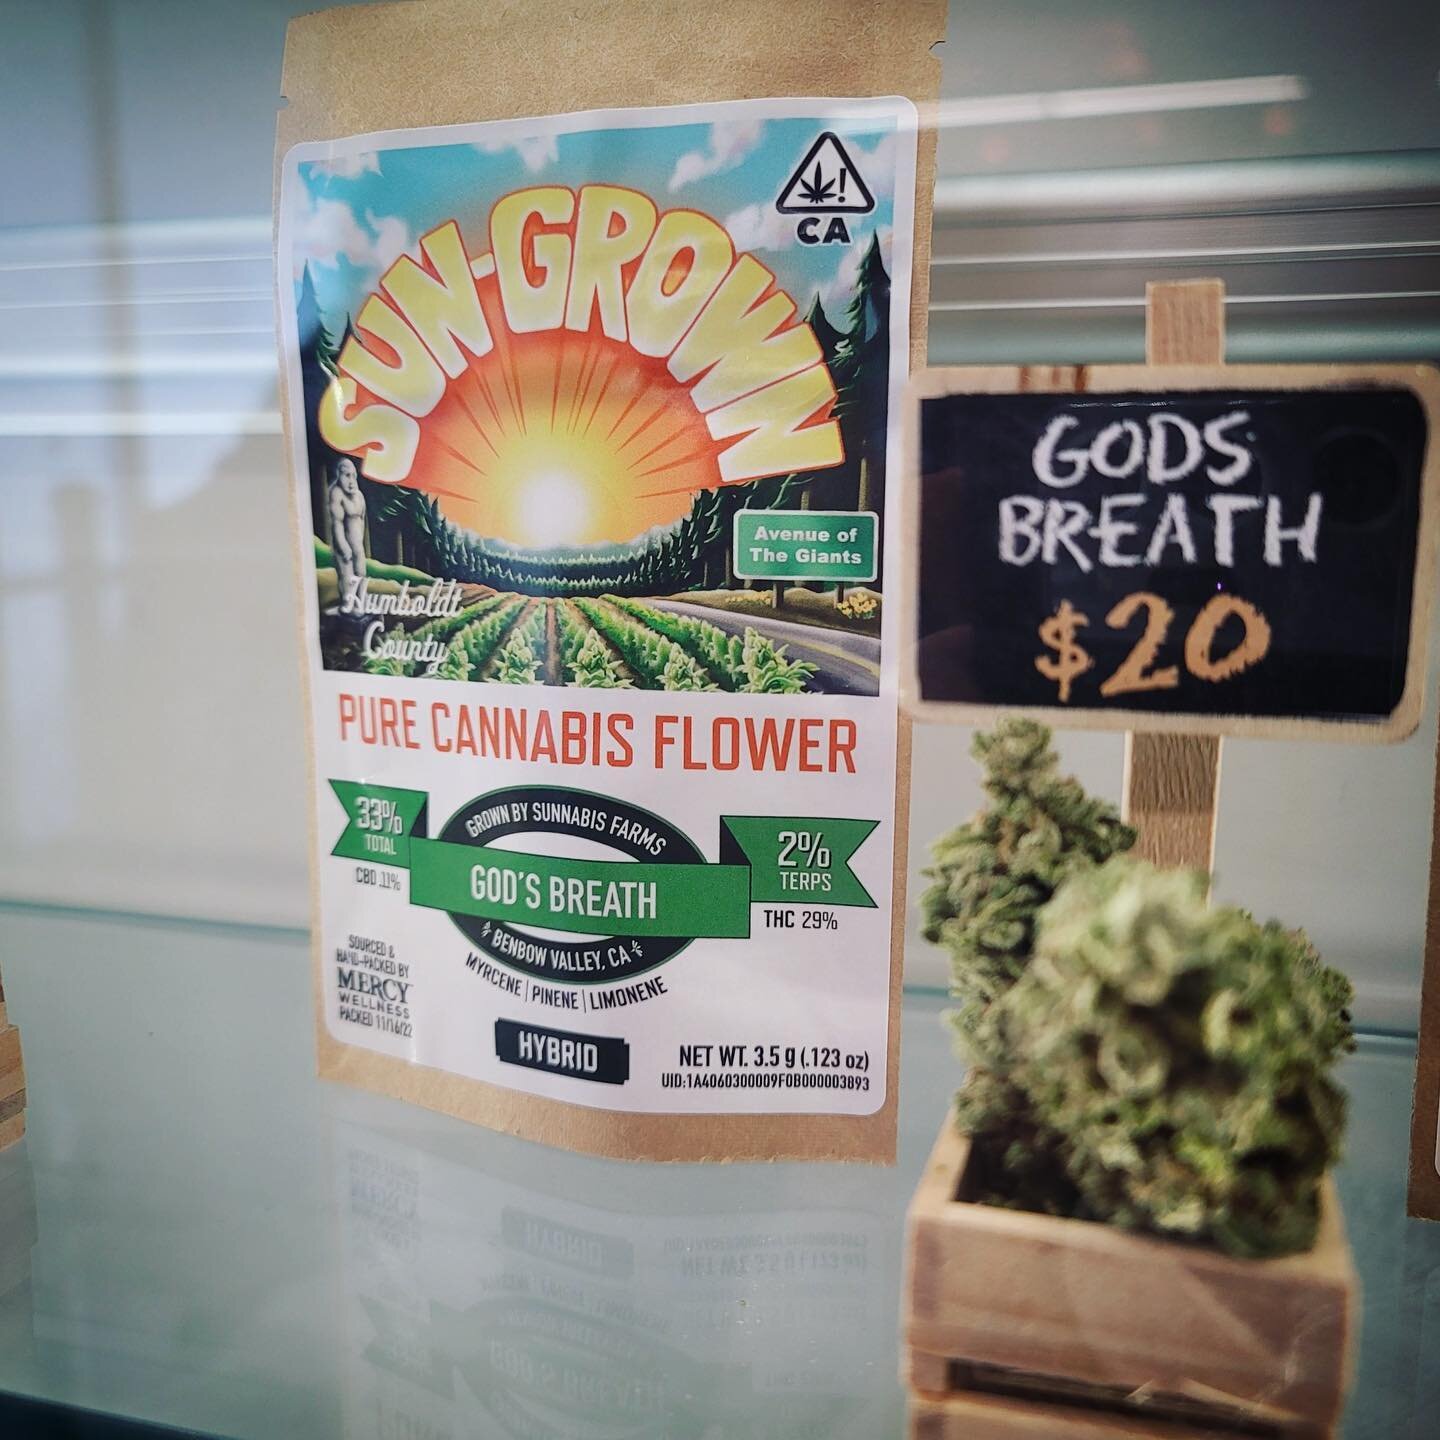 What what what???? Fresh drop! @mercywellness2 just stocked their shelves today with sungrown!!!!! We&rsquo;re super stoked to see the God&rsquo;s Breath from @conceptionnurseries in its beautiful package now available to anyone over 21 when they go 